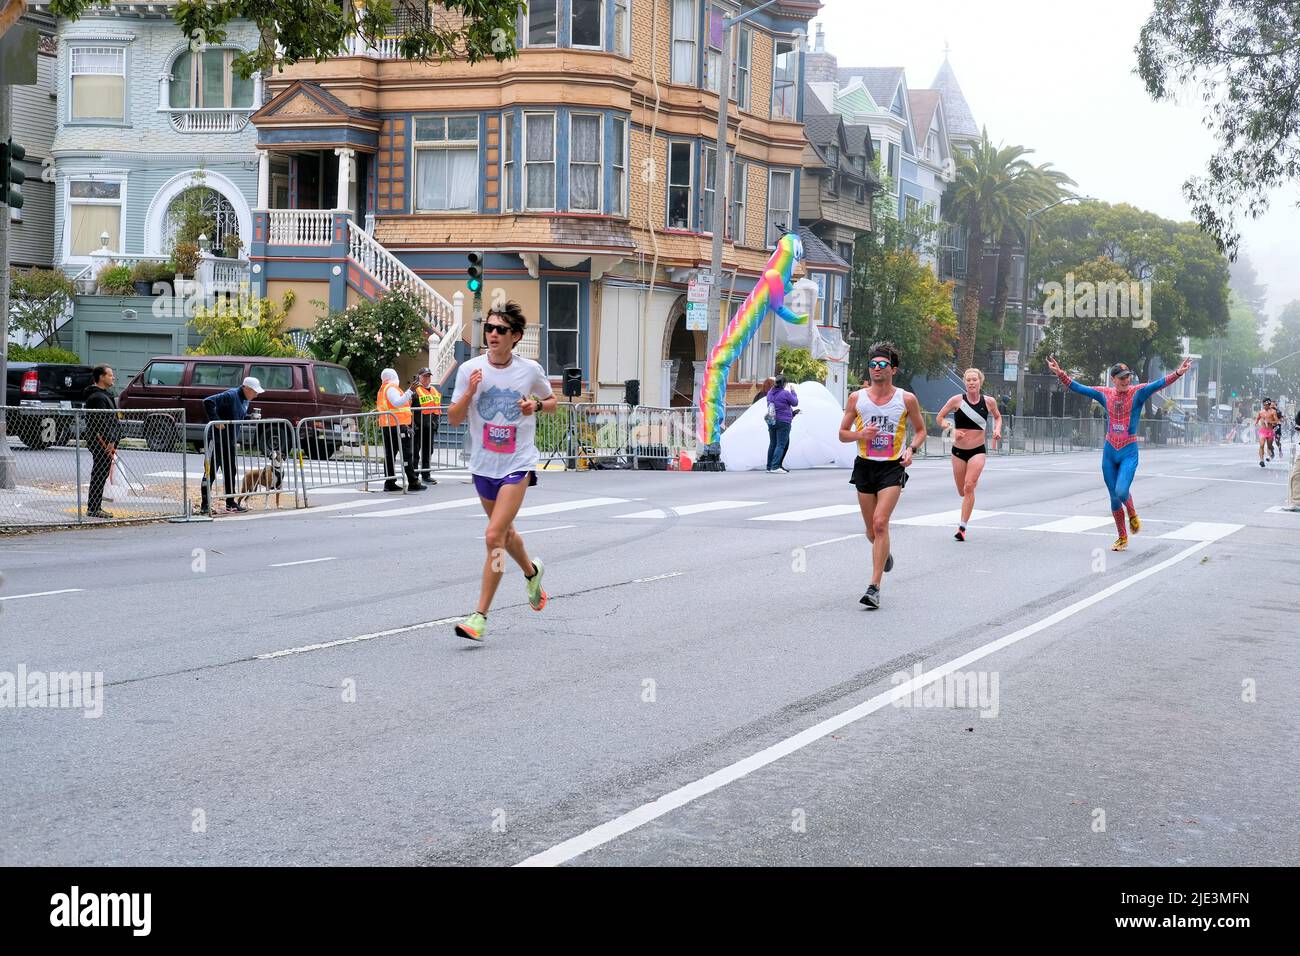 Scenes From The 2022 Bay To Breakers 12k Foot Race In San Francisco